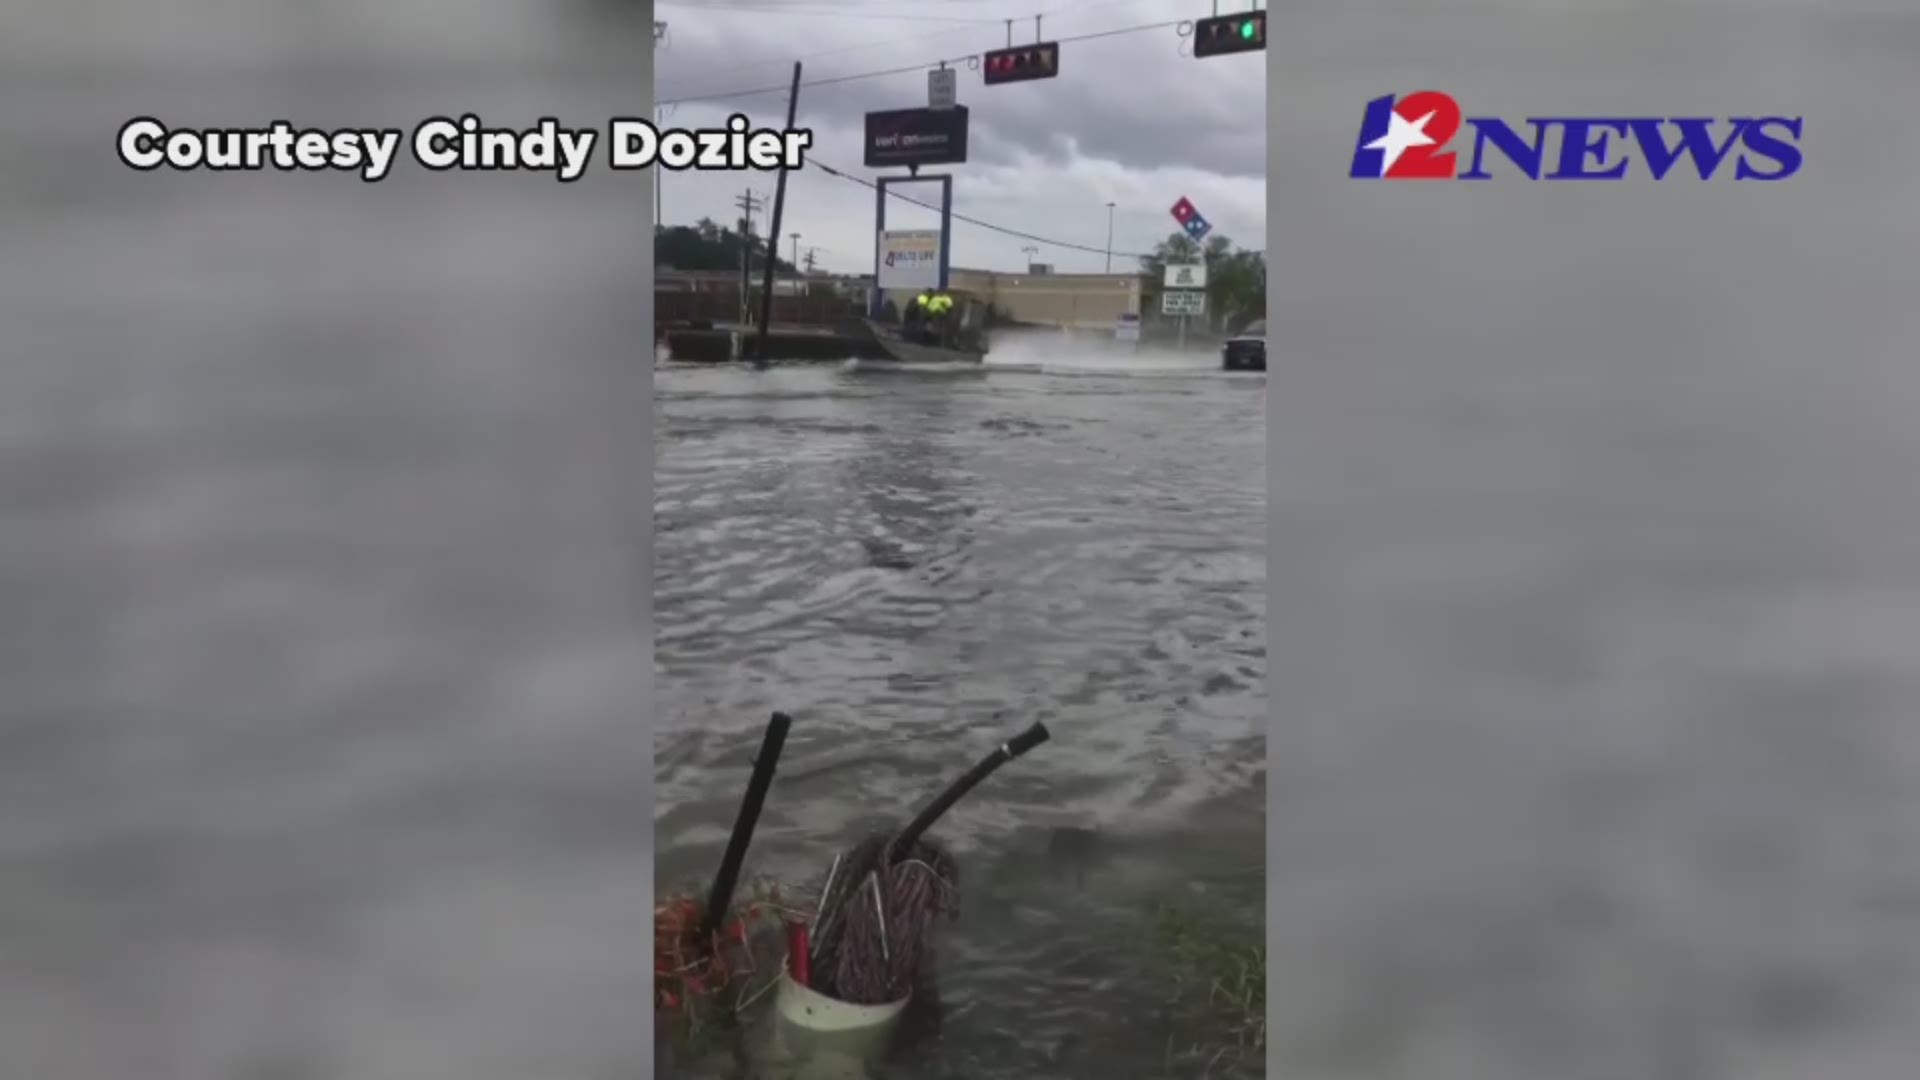 Airboats and trucks are sharing roadways in Vidor, Texas as Imelda slams the region.